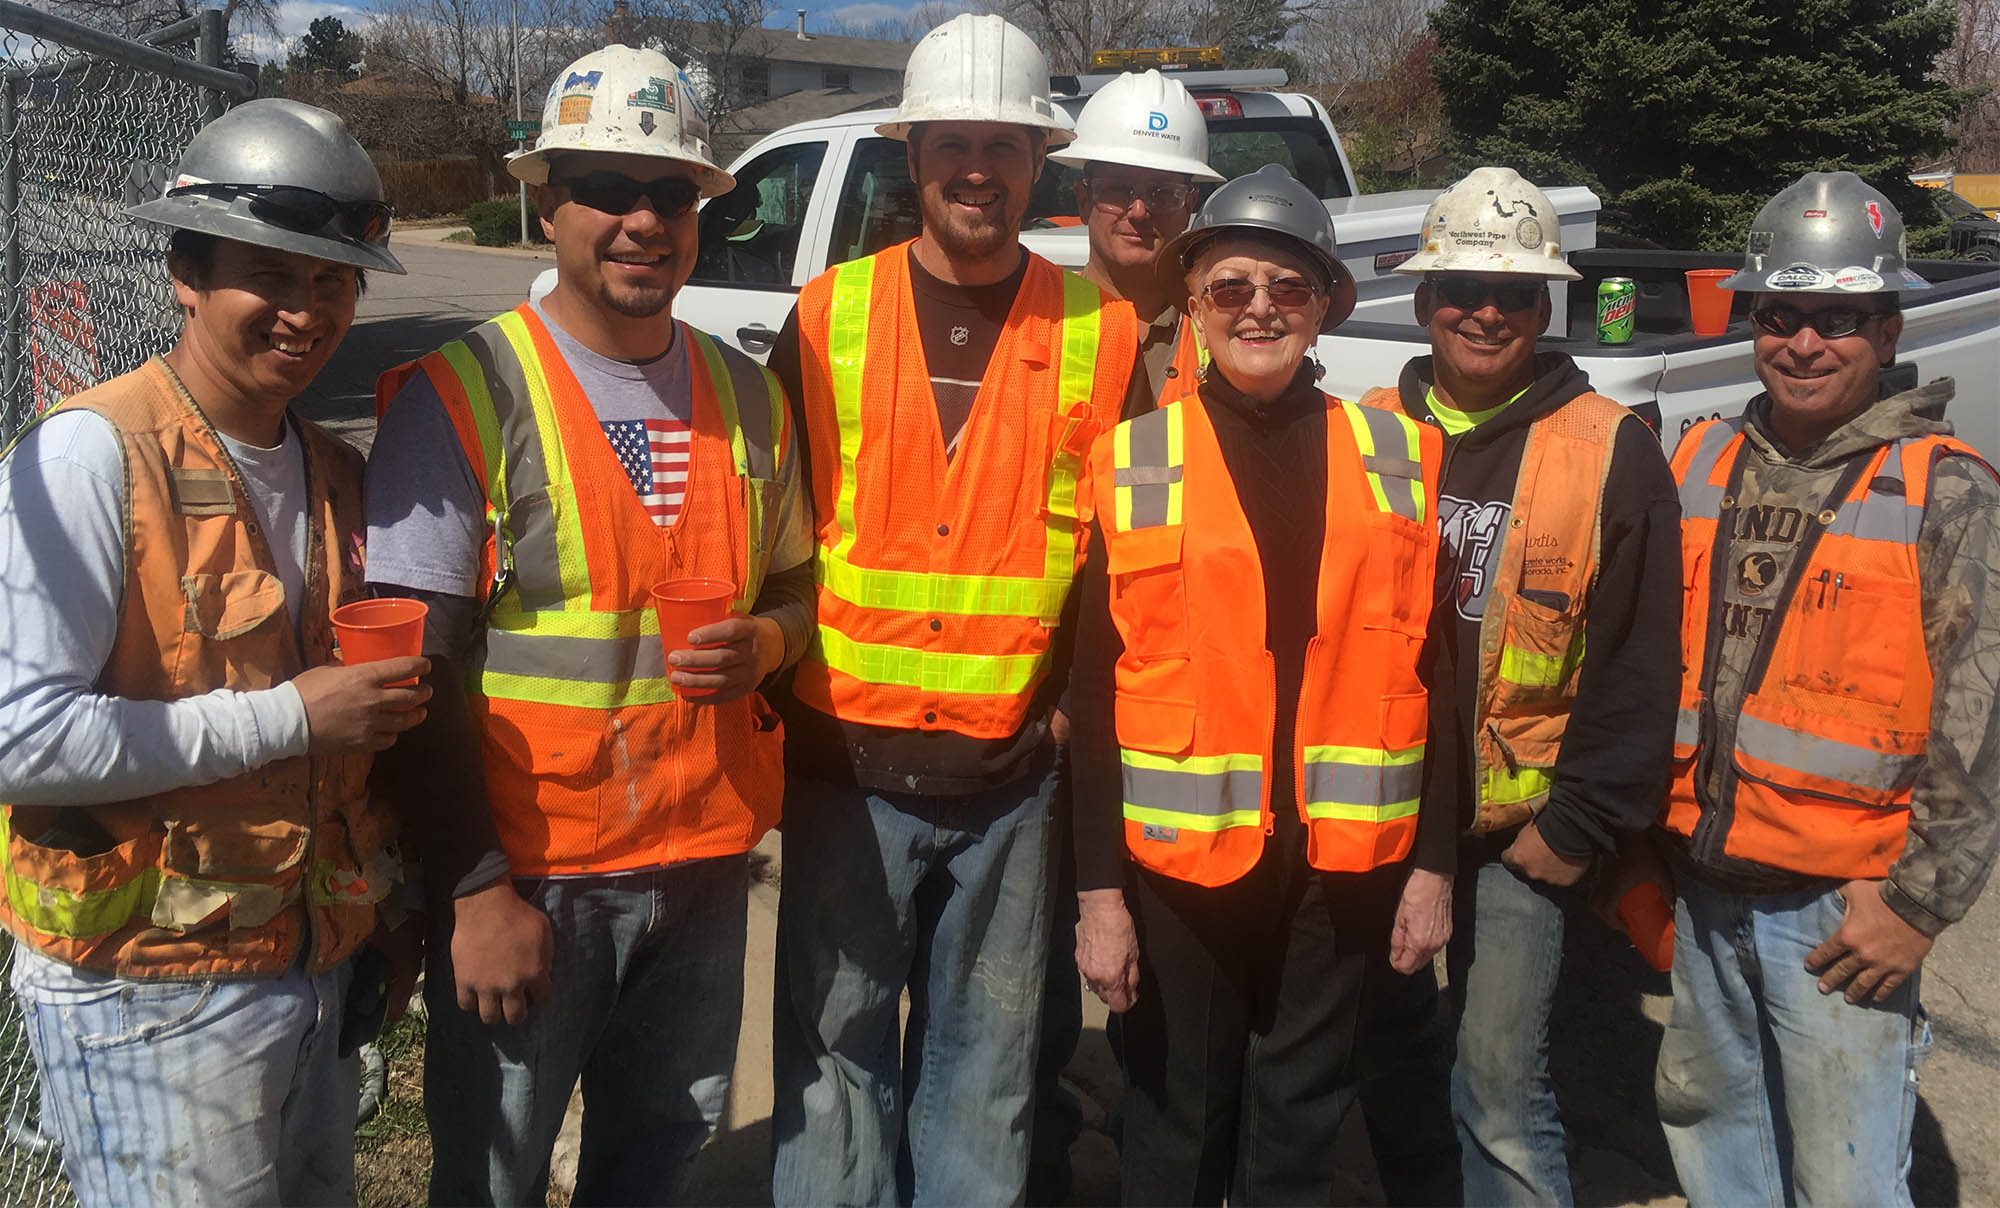 Jeanne Thompson and her friends from Denver Water and Concrete Works of Colorado.